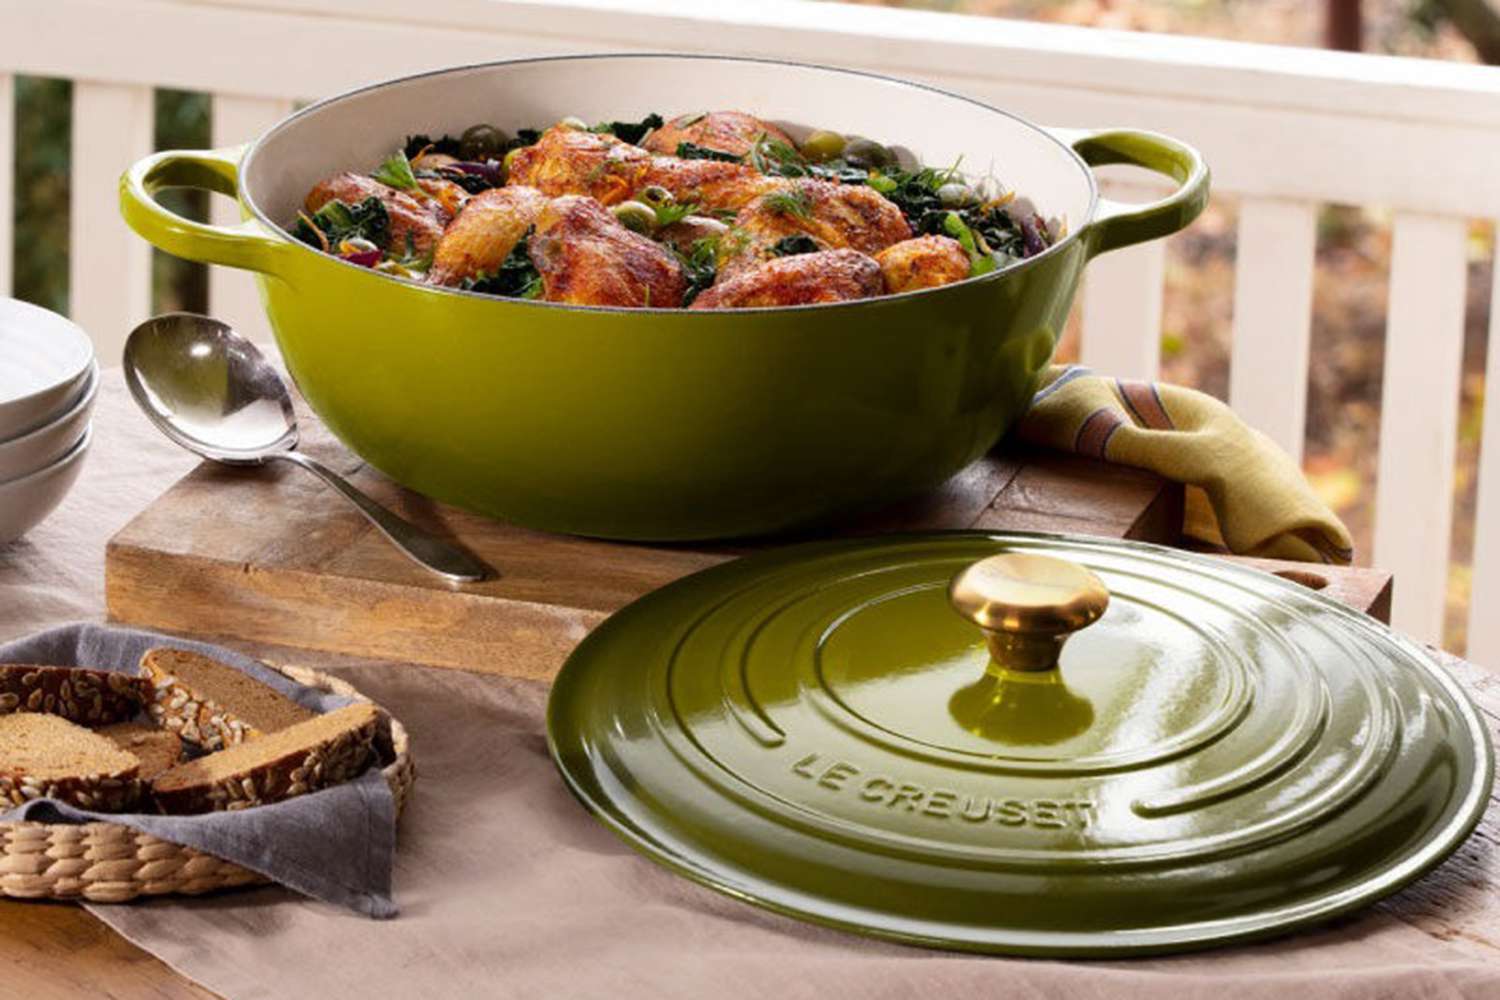 Le Creuset, All-Clad, Calphalon and More Cookware Brands are on Sale Up to  60% Off